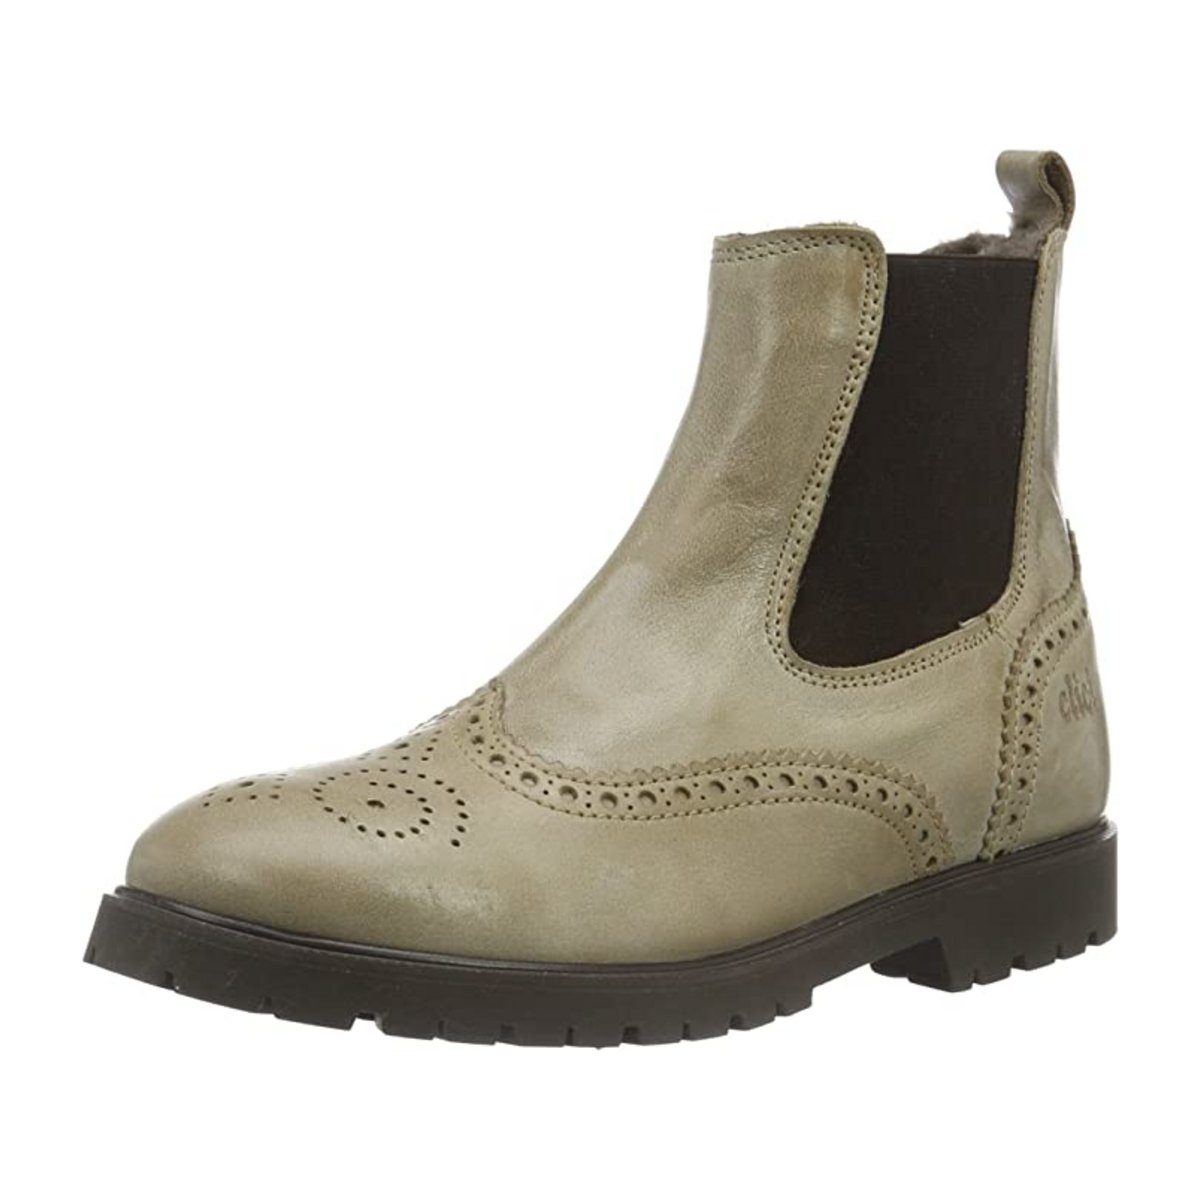 Clic beige Chelseaboots (1-tlg)